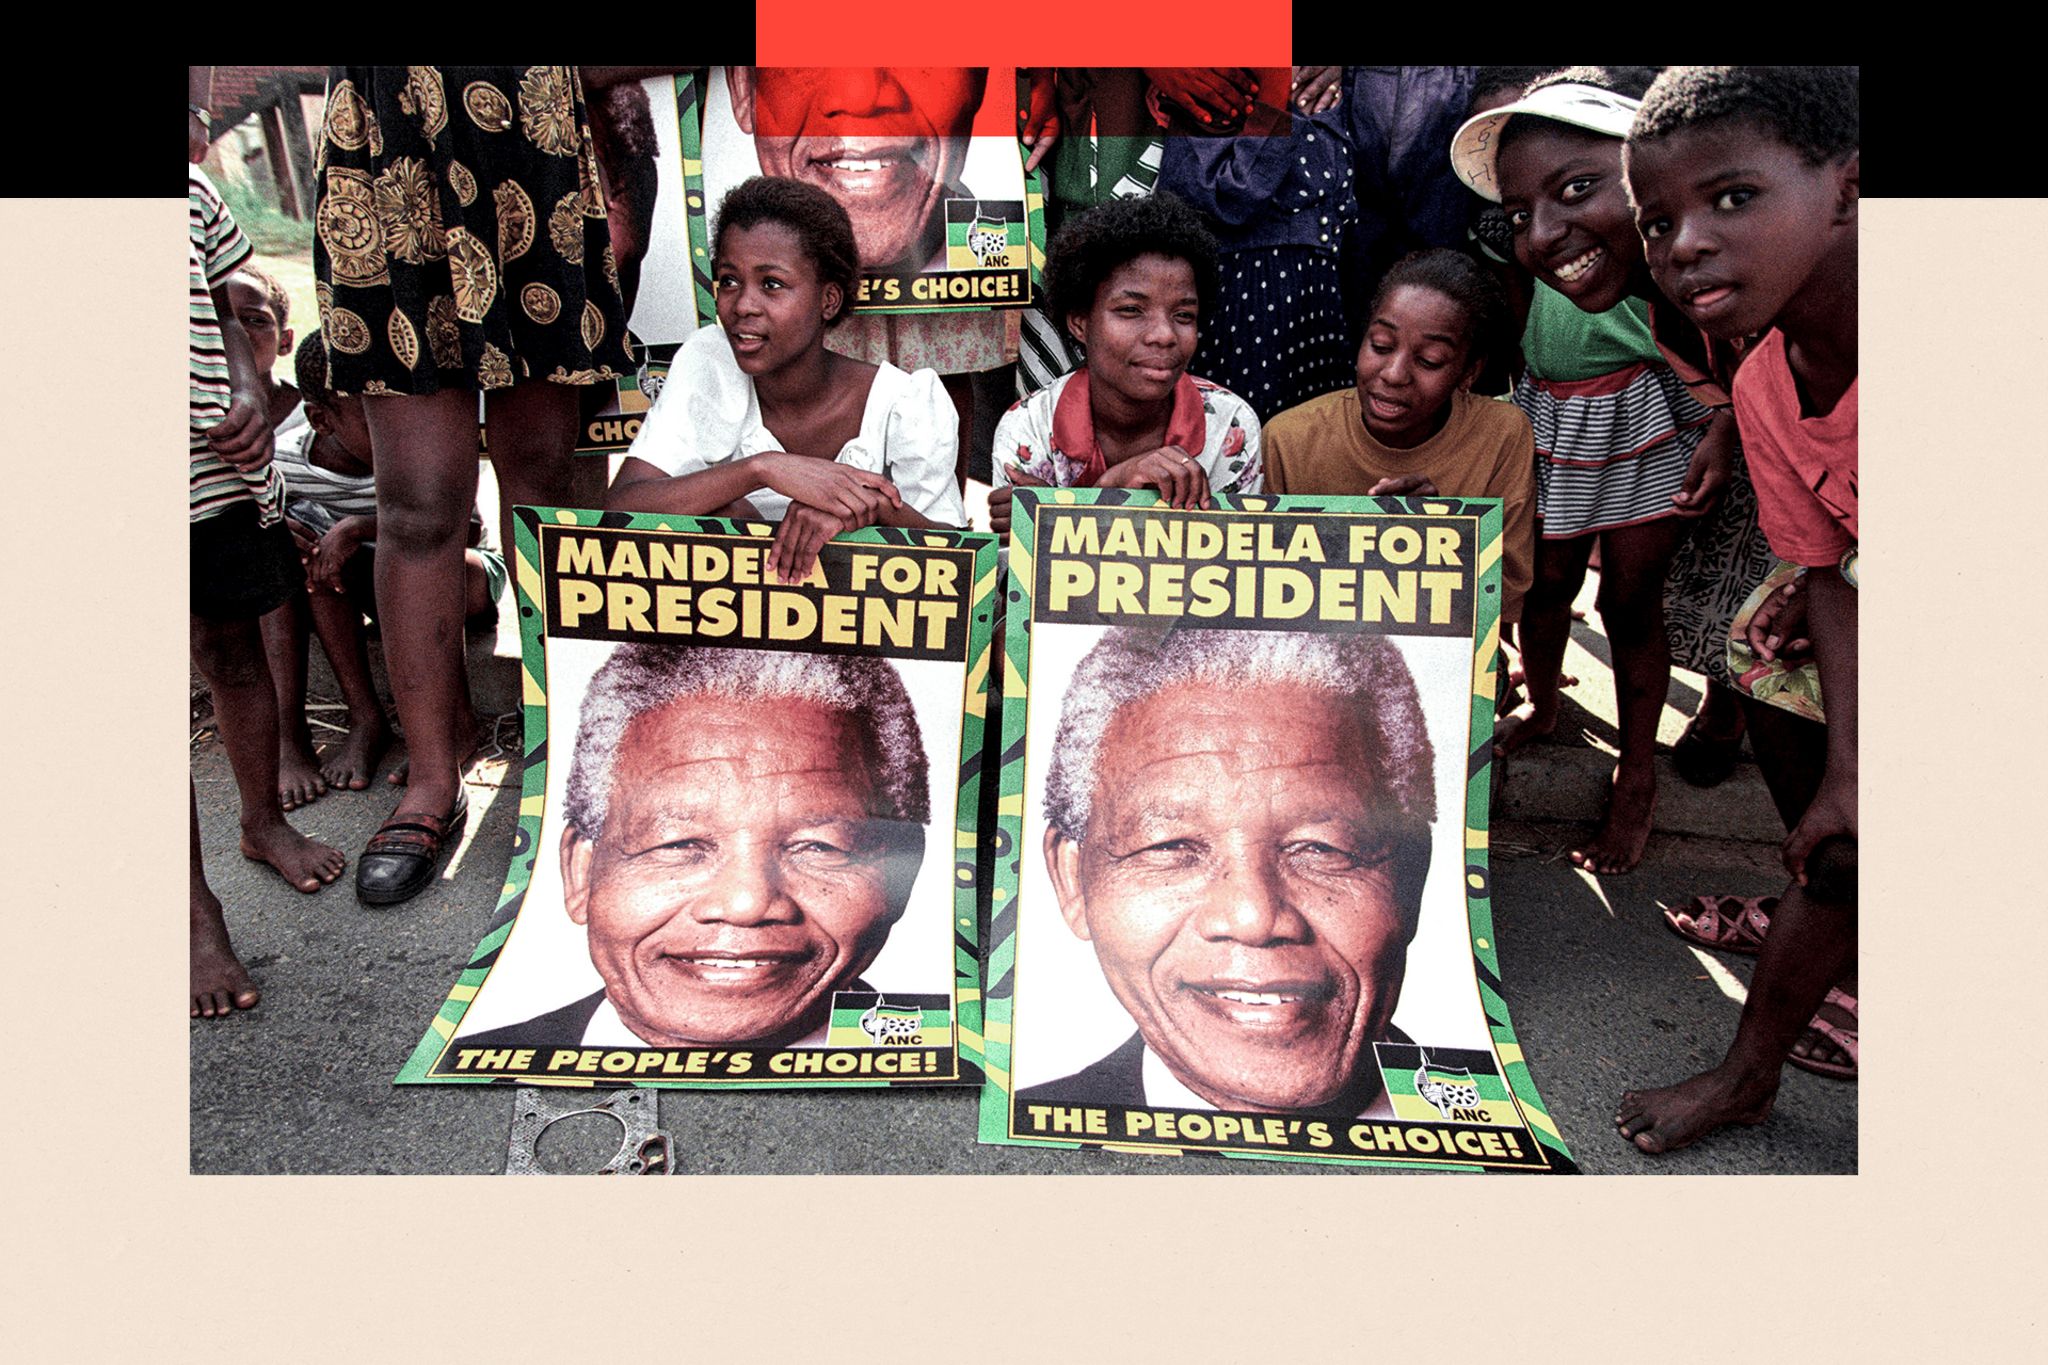 1994 picture of people campaigning for Nelson Mandela